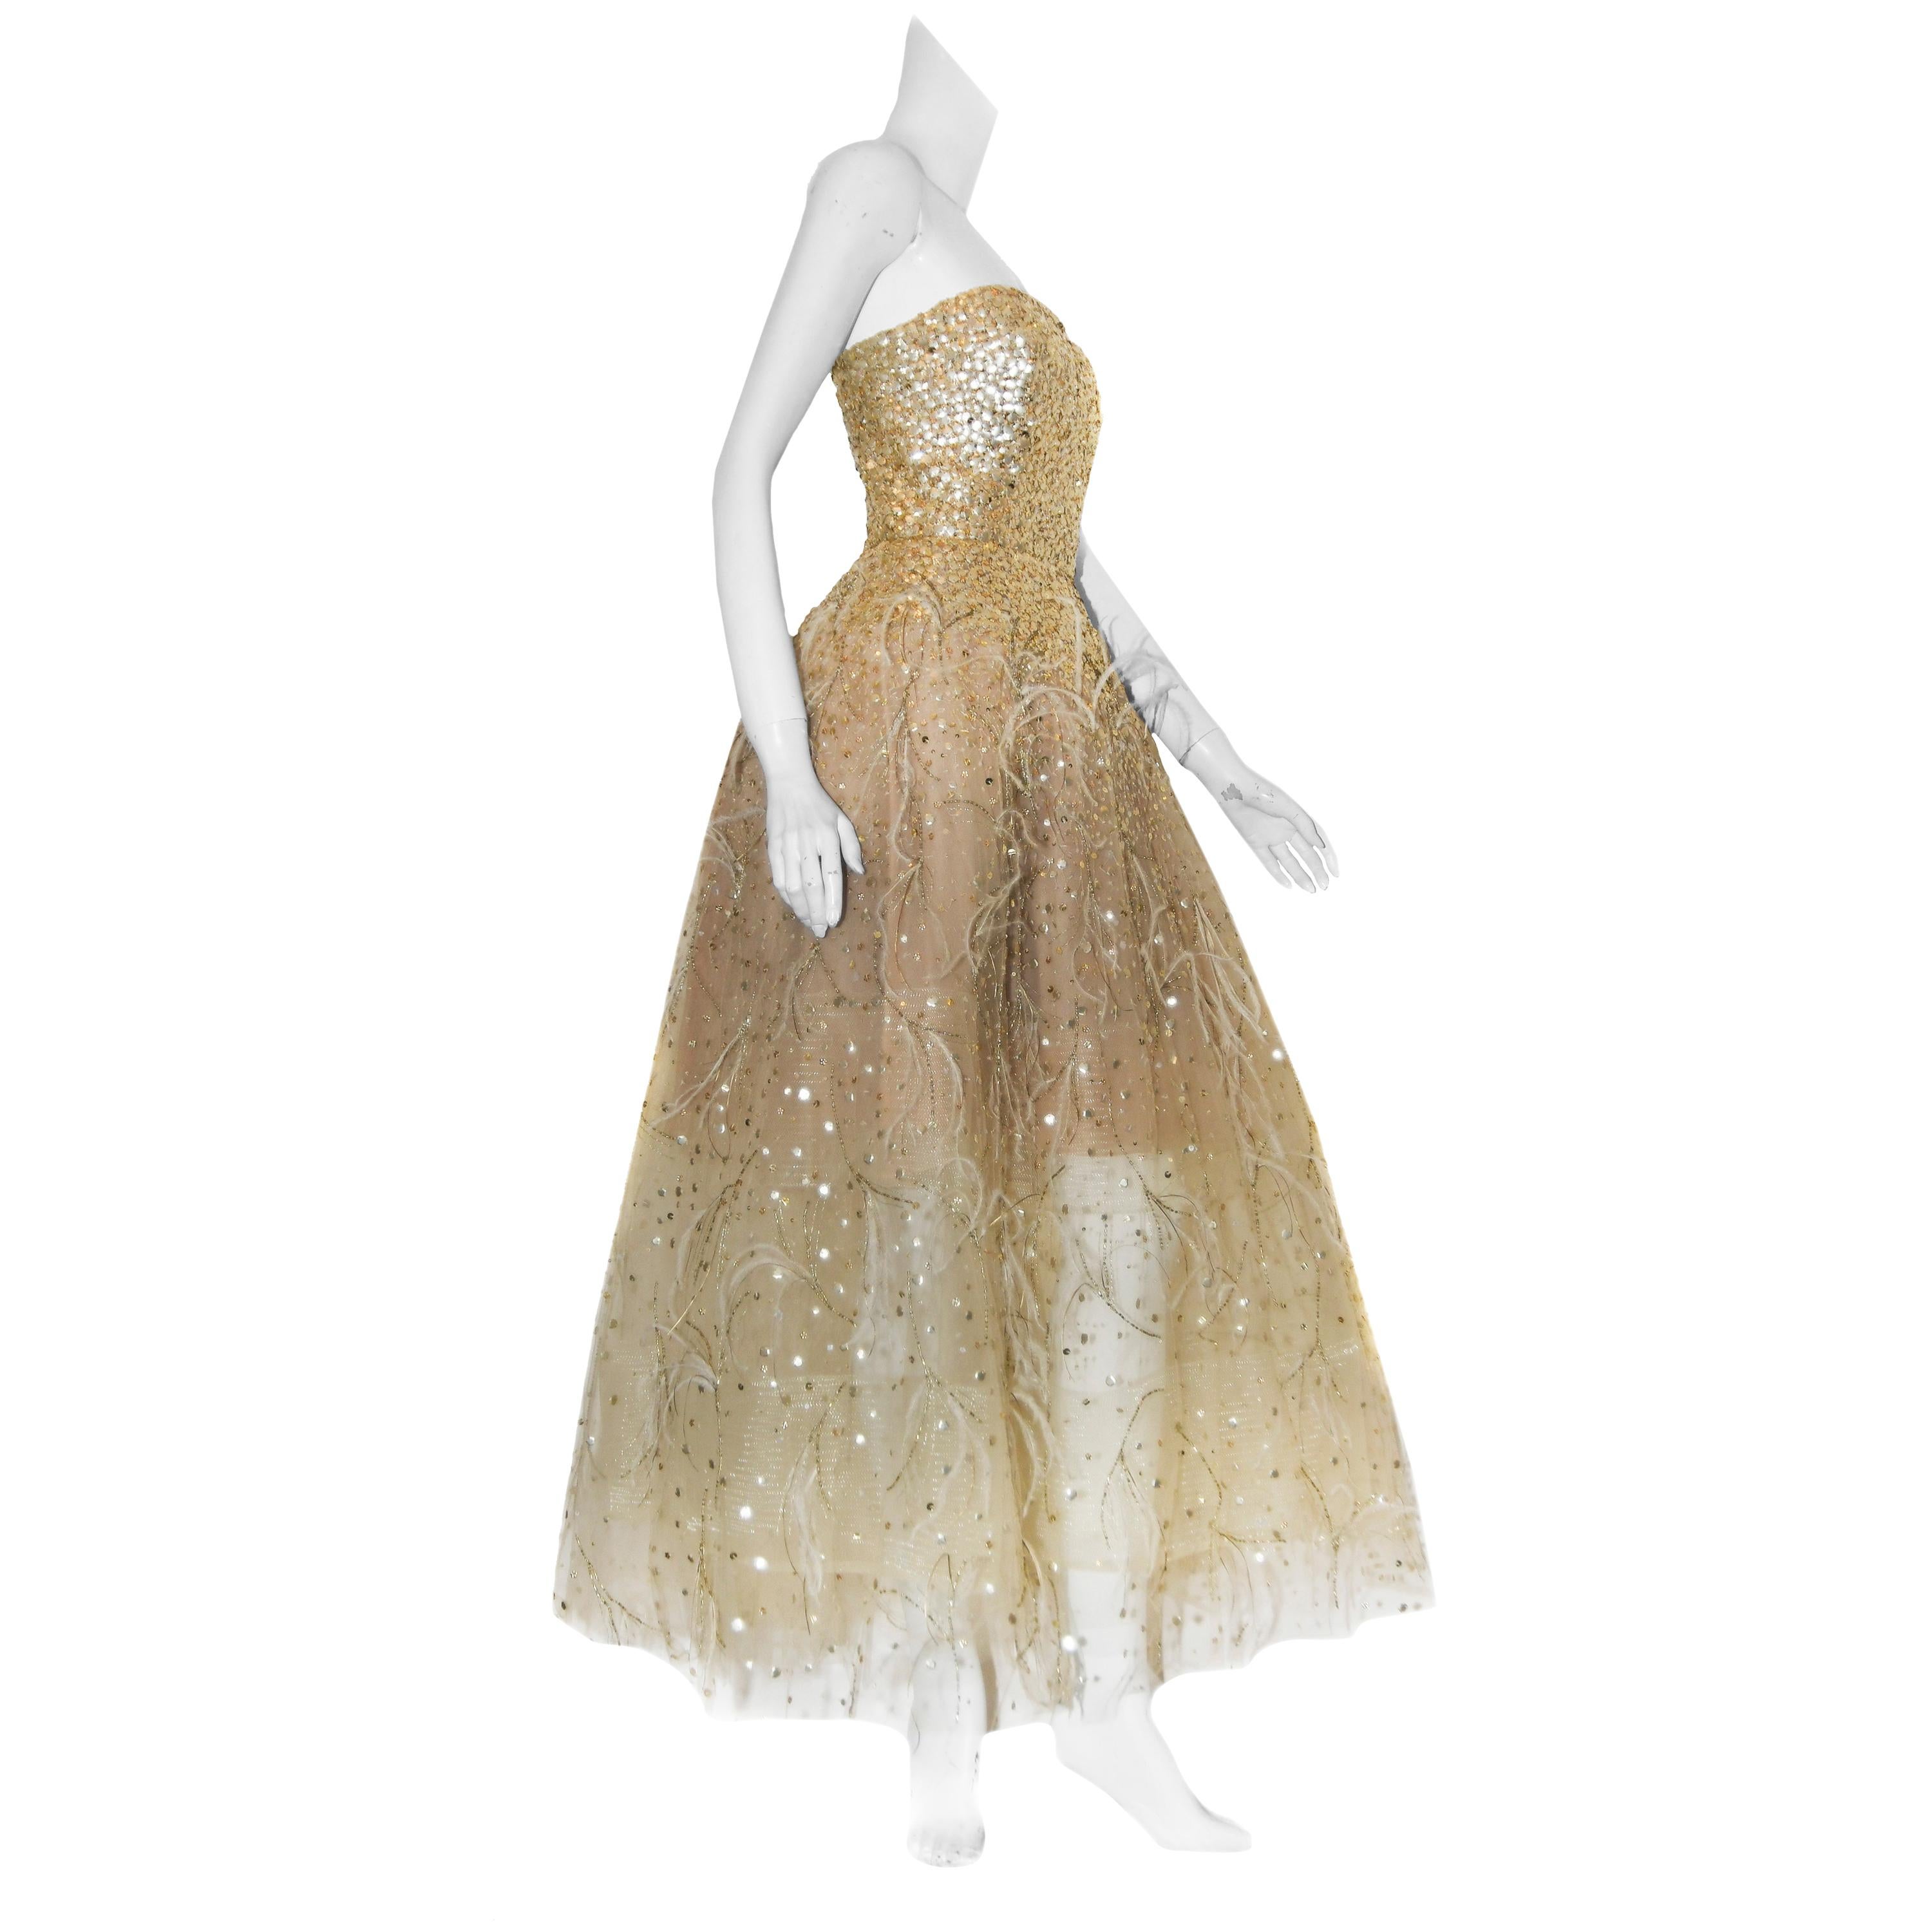 Oscar de la Renta Gold Tone Sequin Strapless Gown With Ostrich Feather Accents